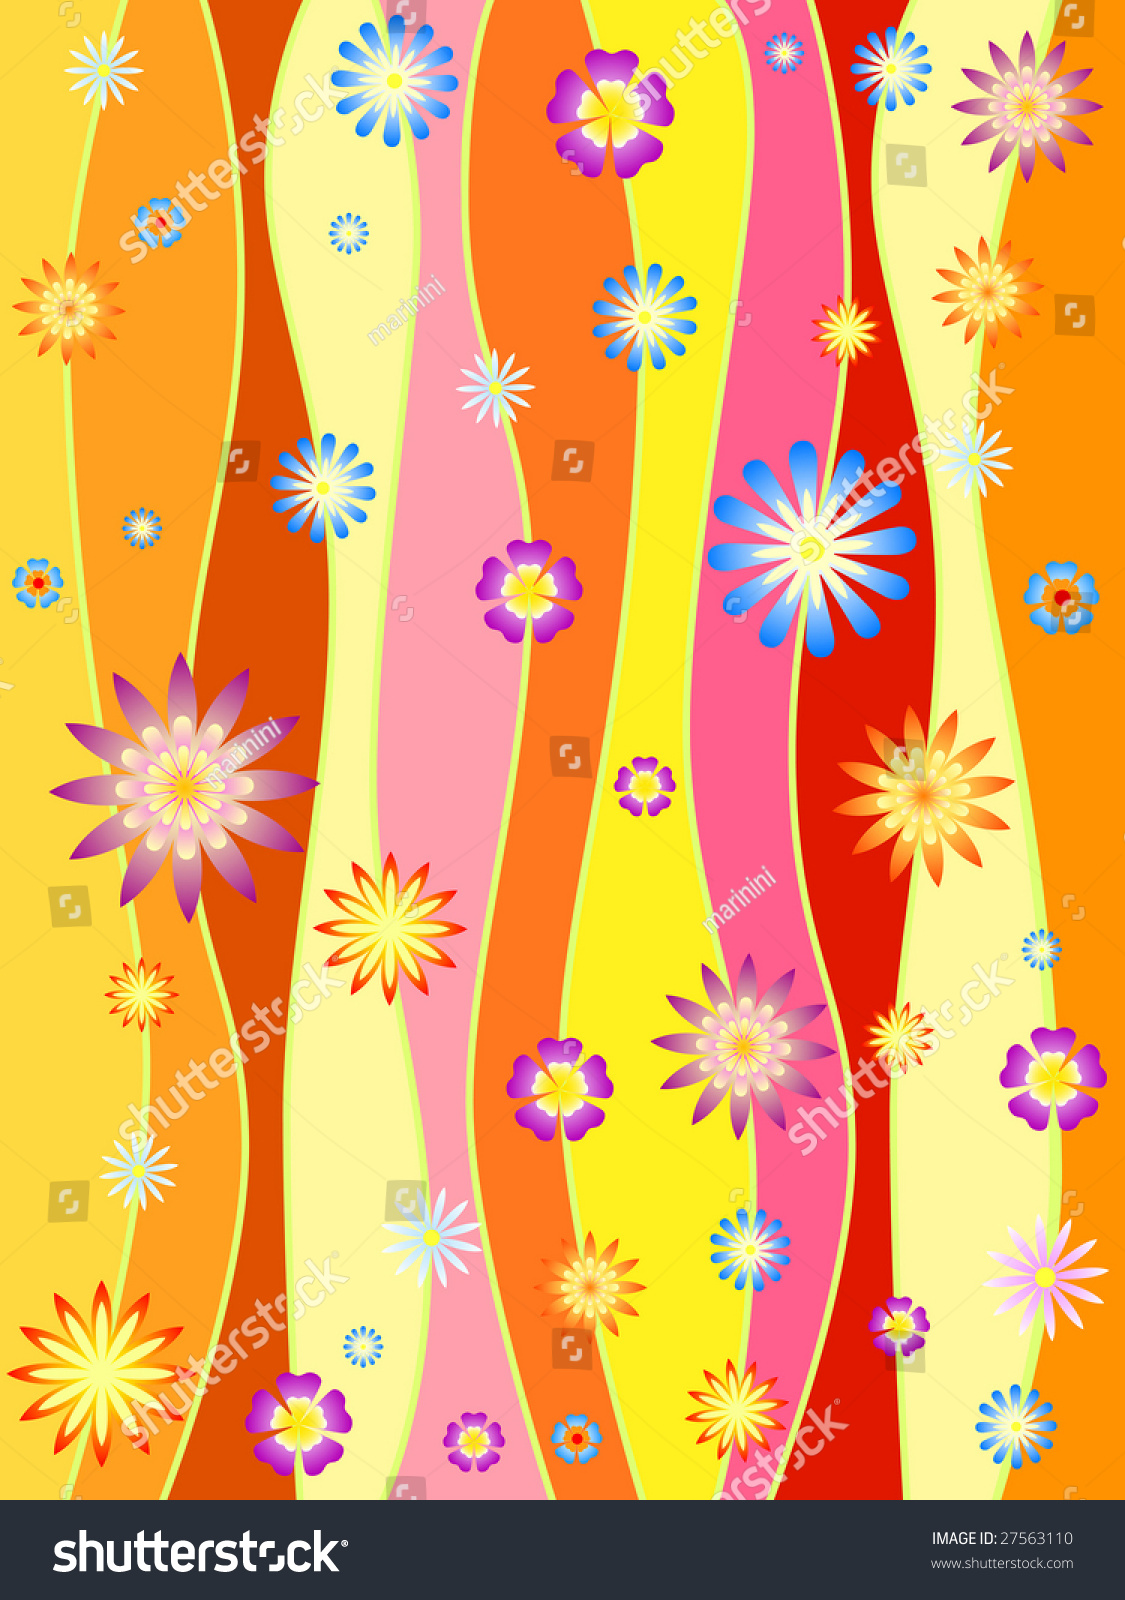 Colours Lines With Colourful Flowers, Spring Motif Stock Photo 27563110 ...